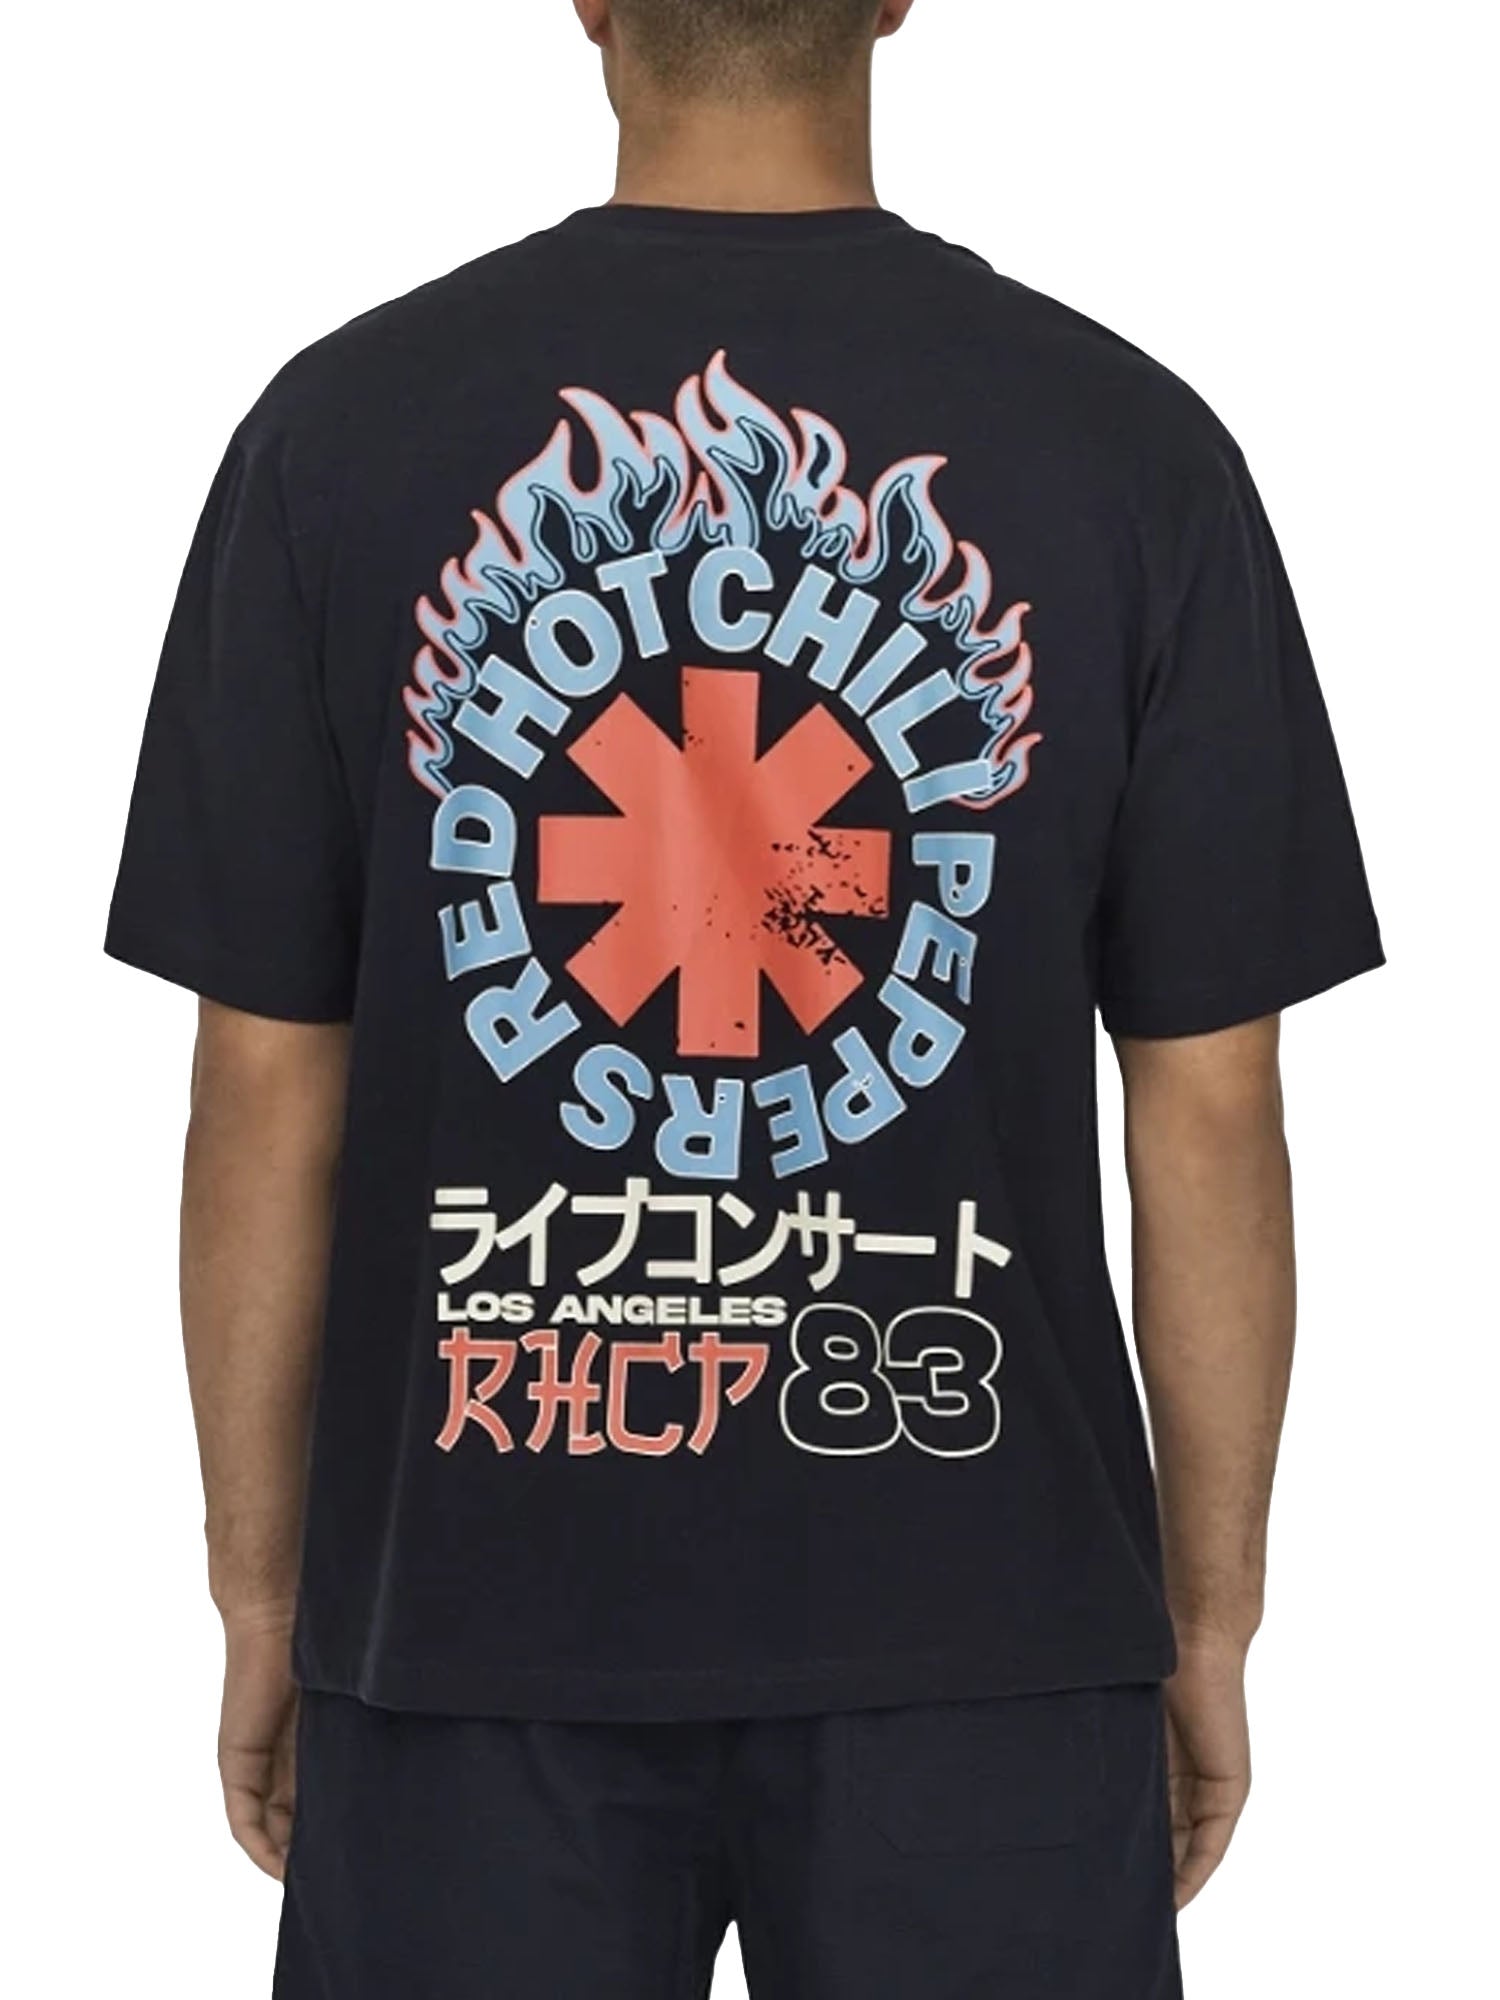 T-Shirt Red Hot Chili Peppers